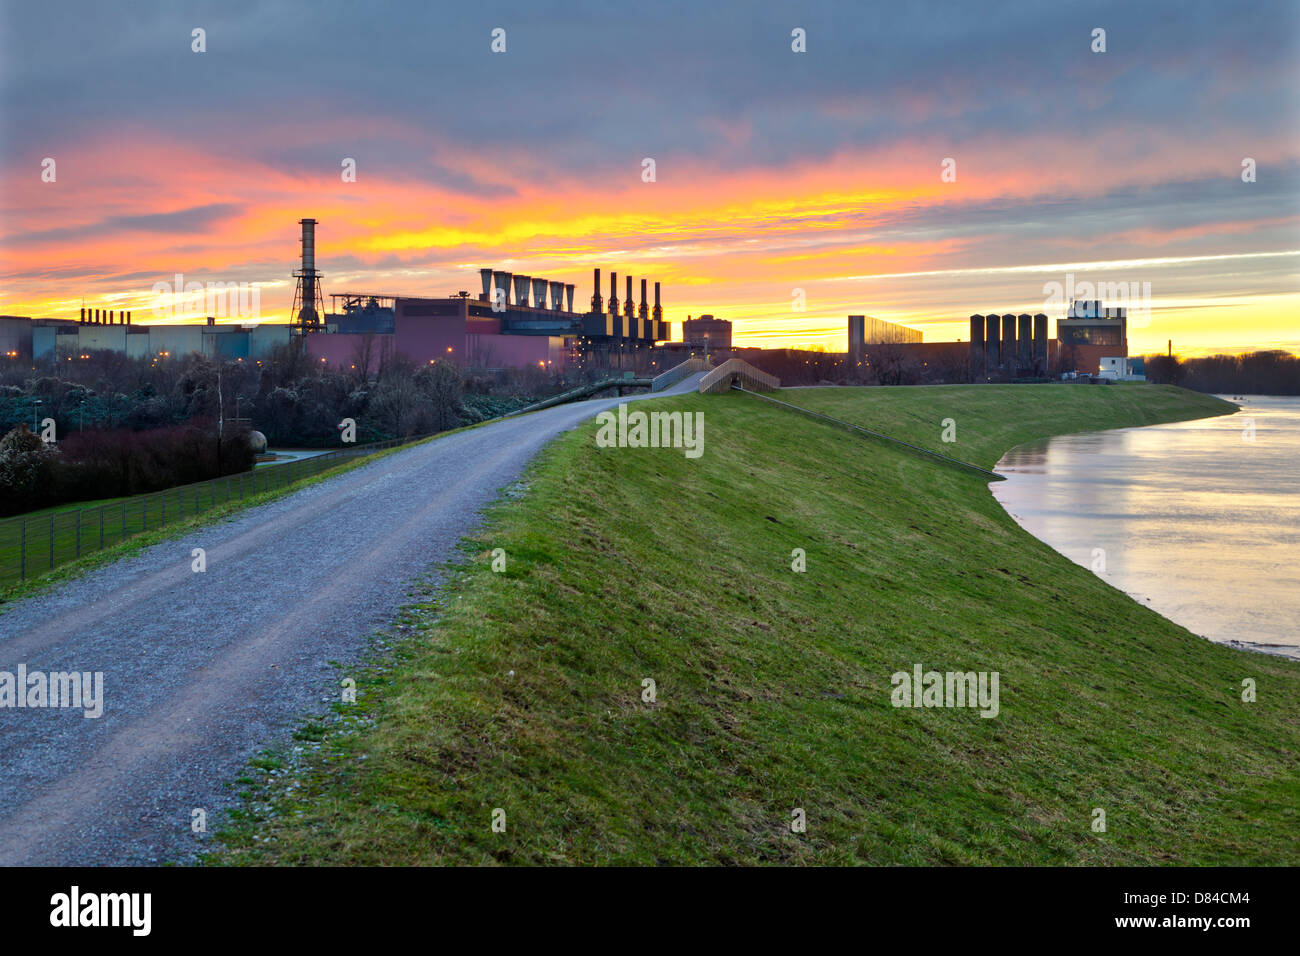 Steel plant next to river with a fiery evening sky, a dyke in the foreground. Stock Photo